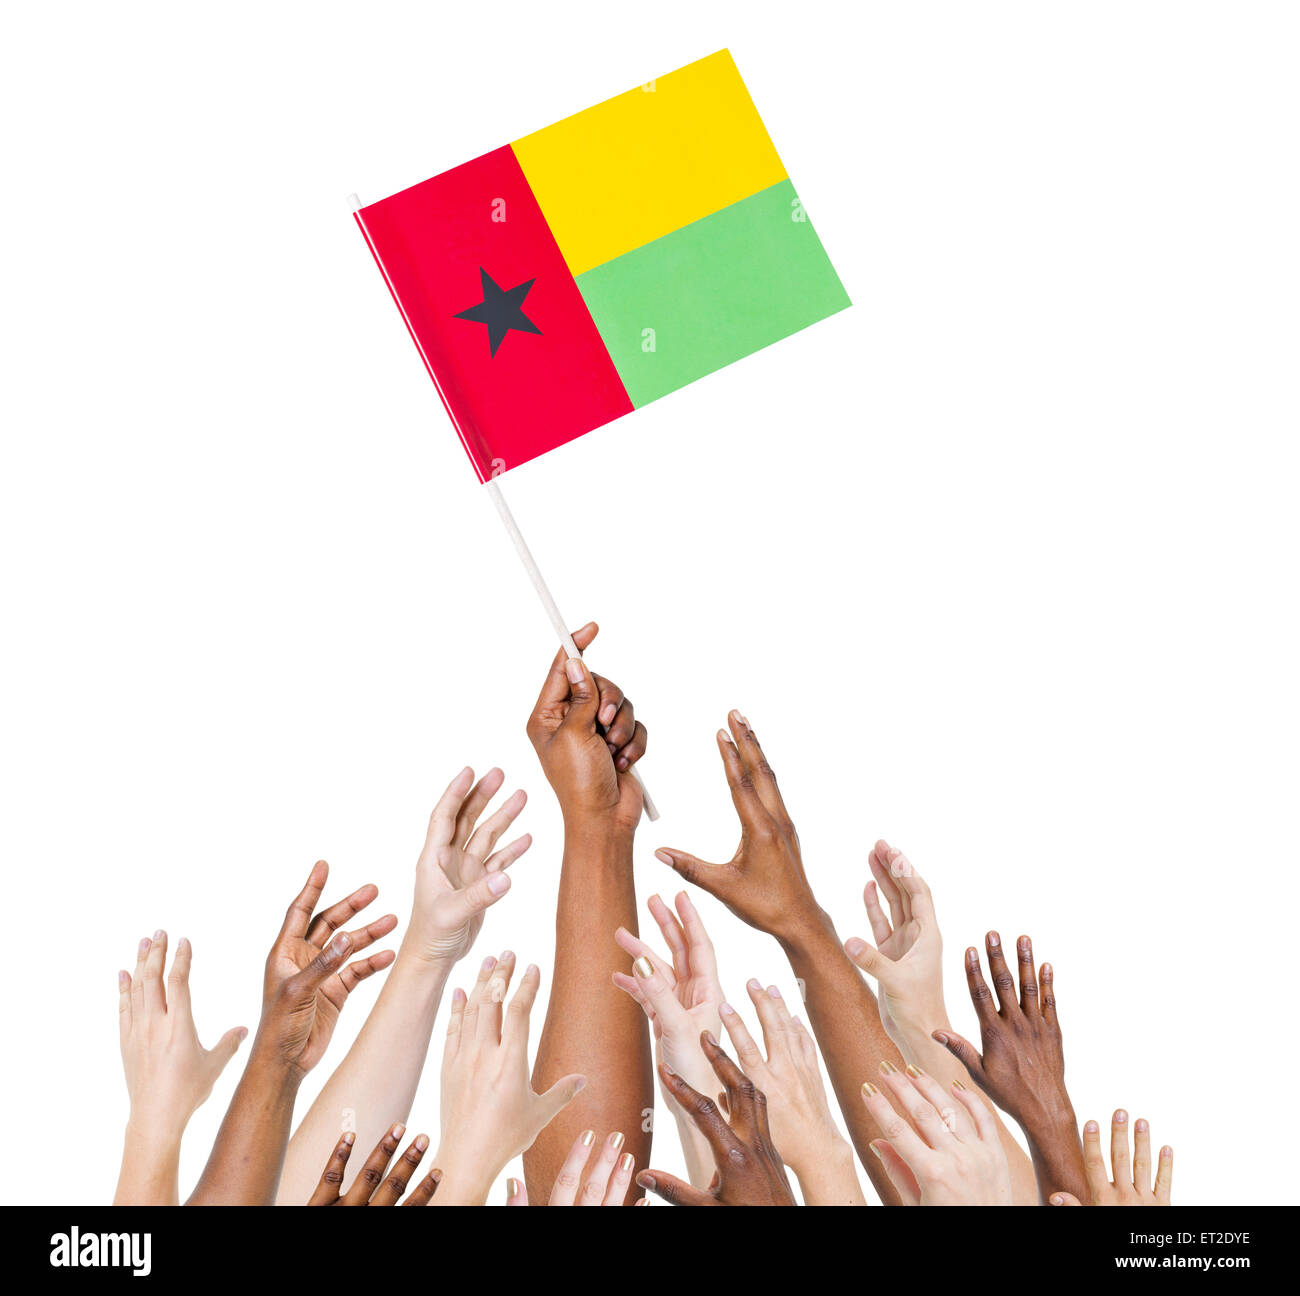 Group of multi-ethnic people reaching for and holding the flag of Guinea Bissau. Stock Photo